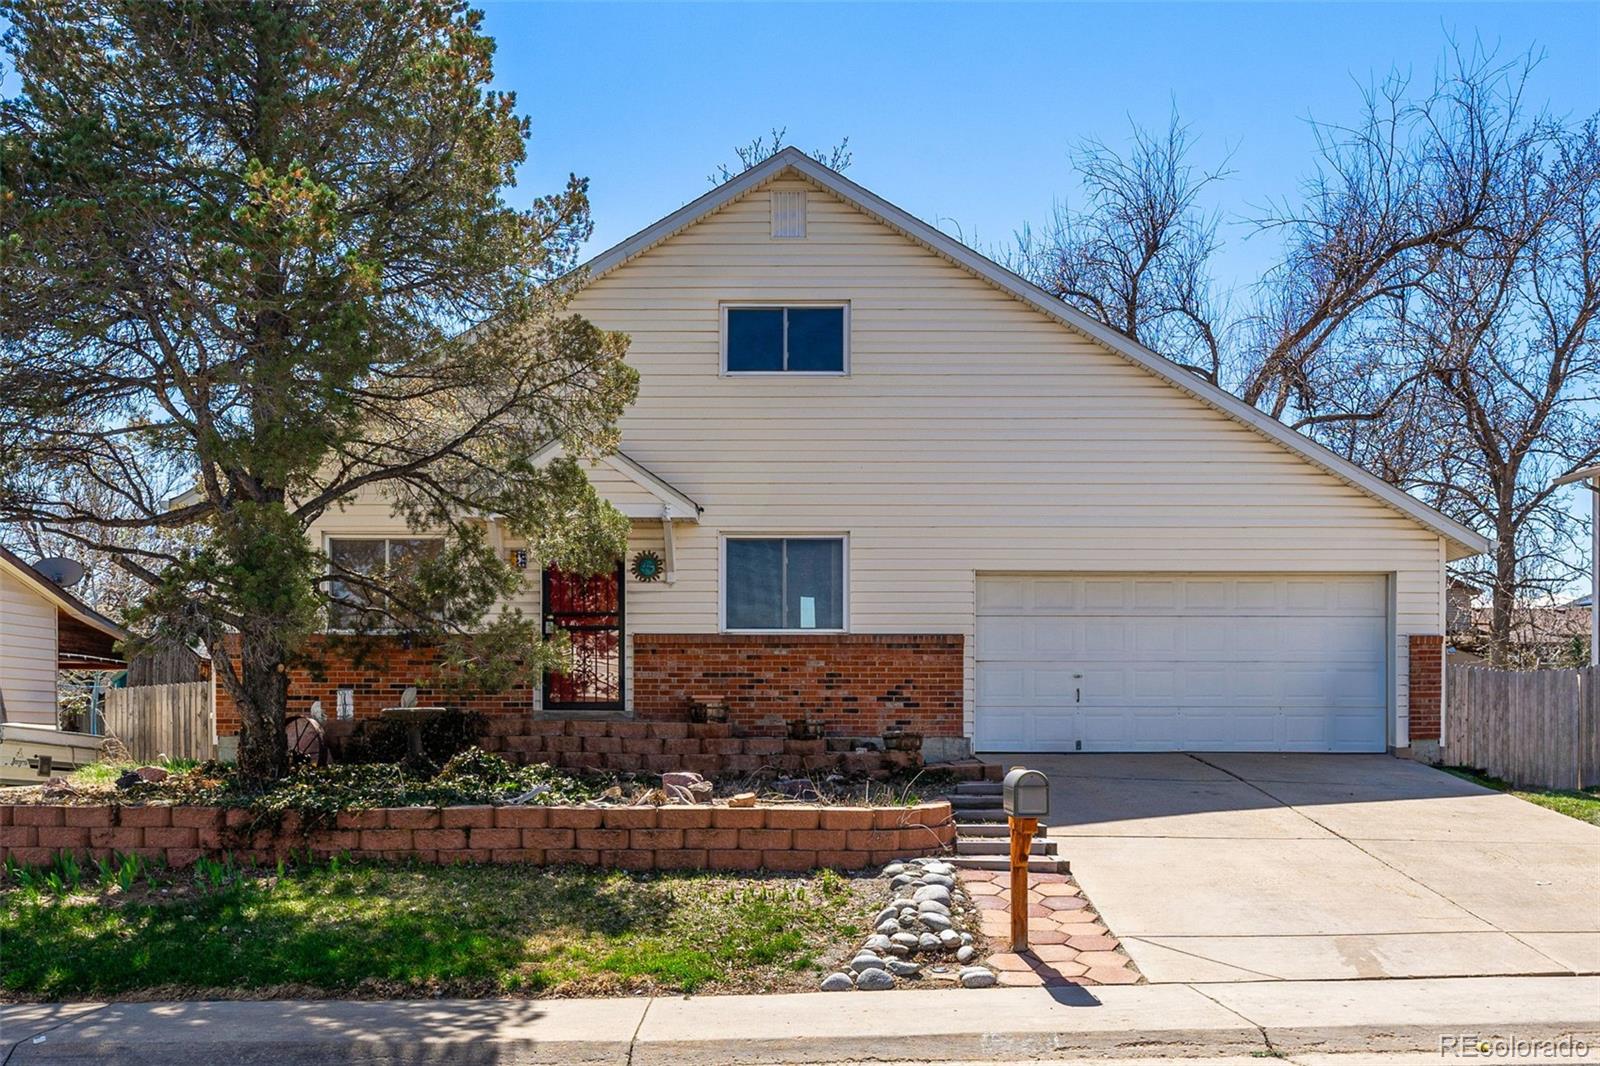 6230 W 111th Avenue, westminster MLS: 5118225 Beds: 3 Baths: 2 Price: $475,000